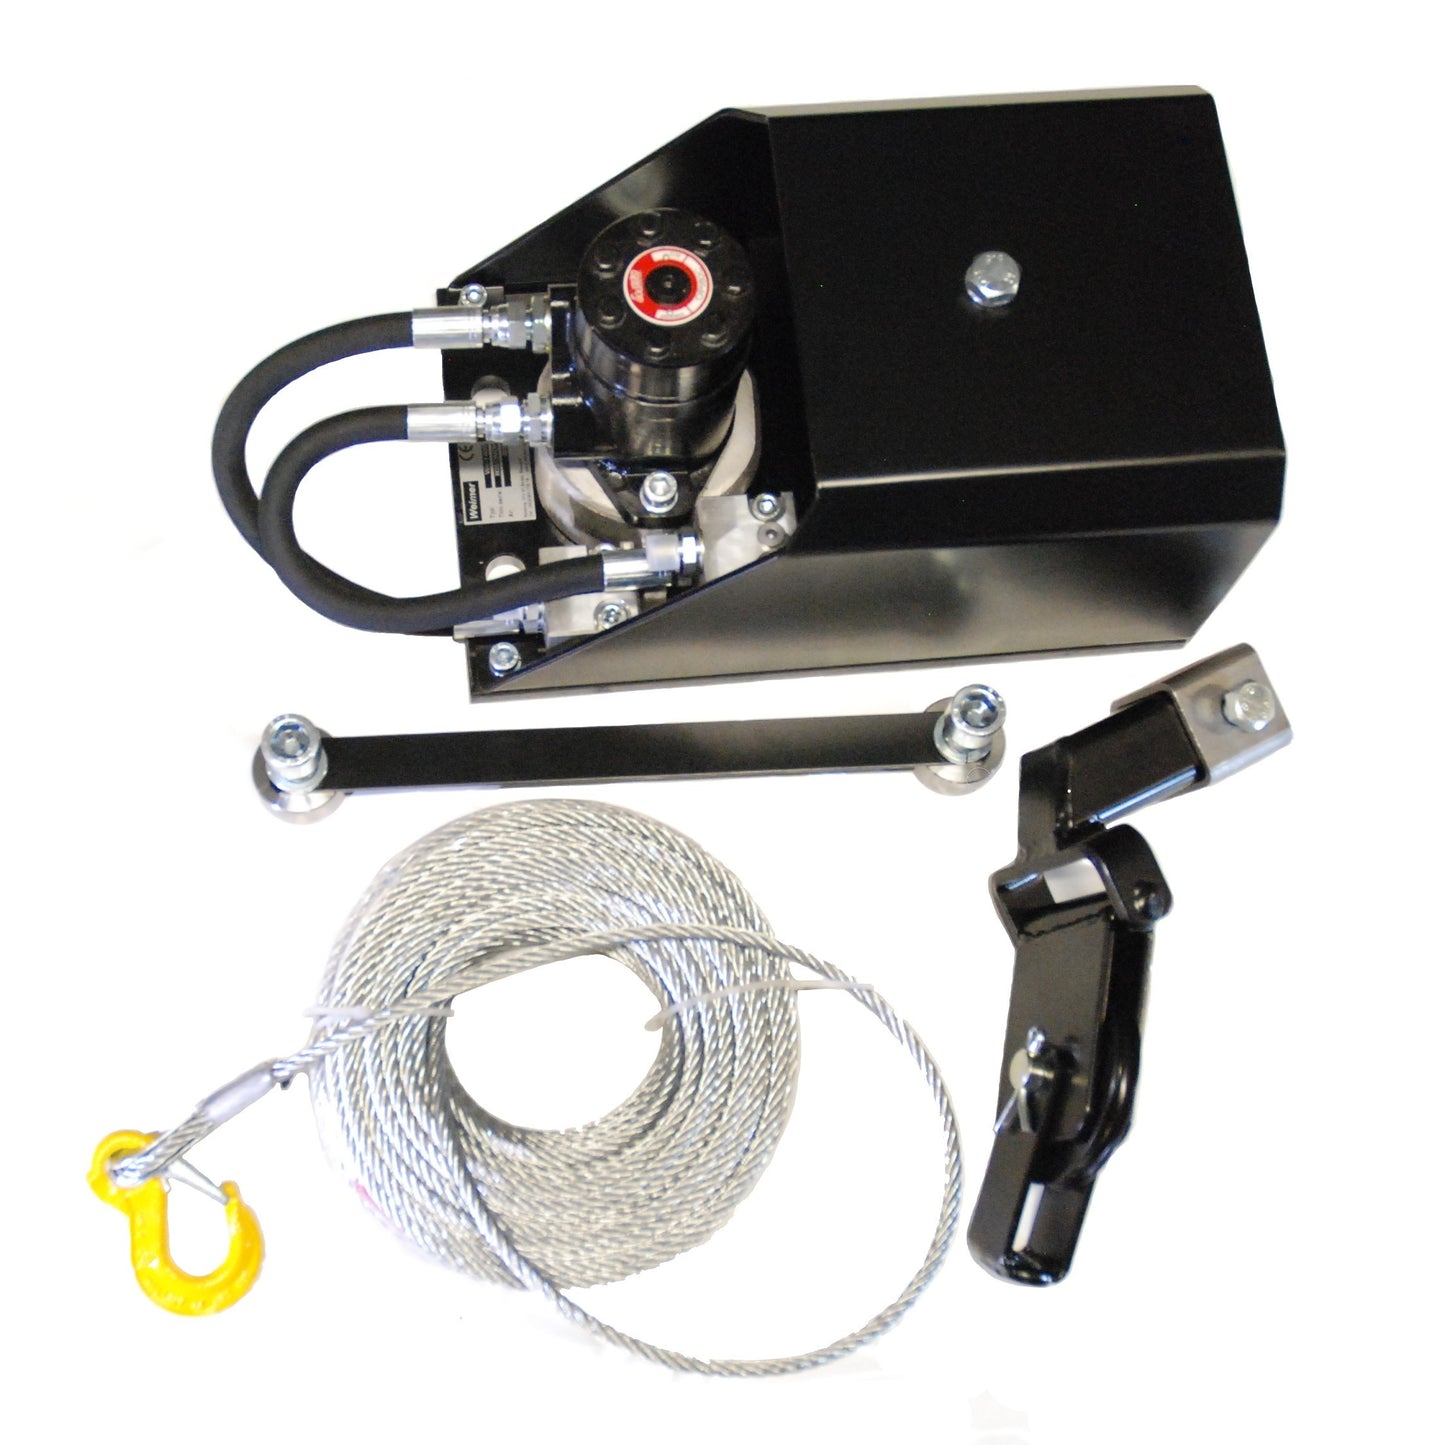 Winch We-2200 M3 excl. hose, valve and radio